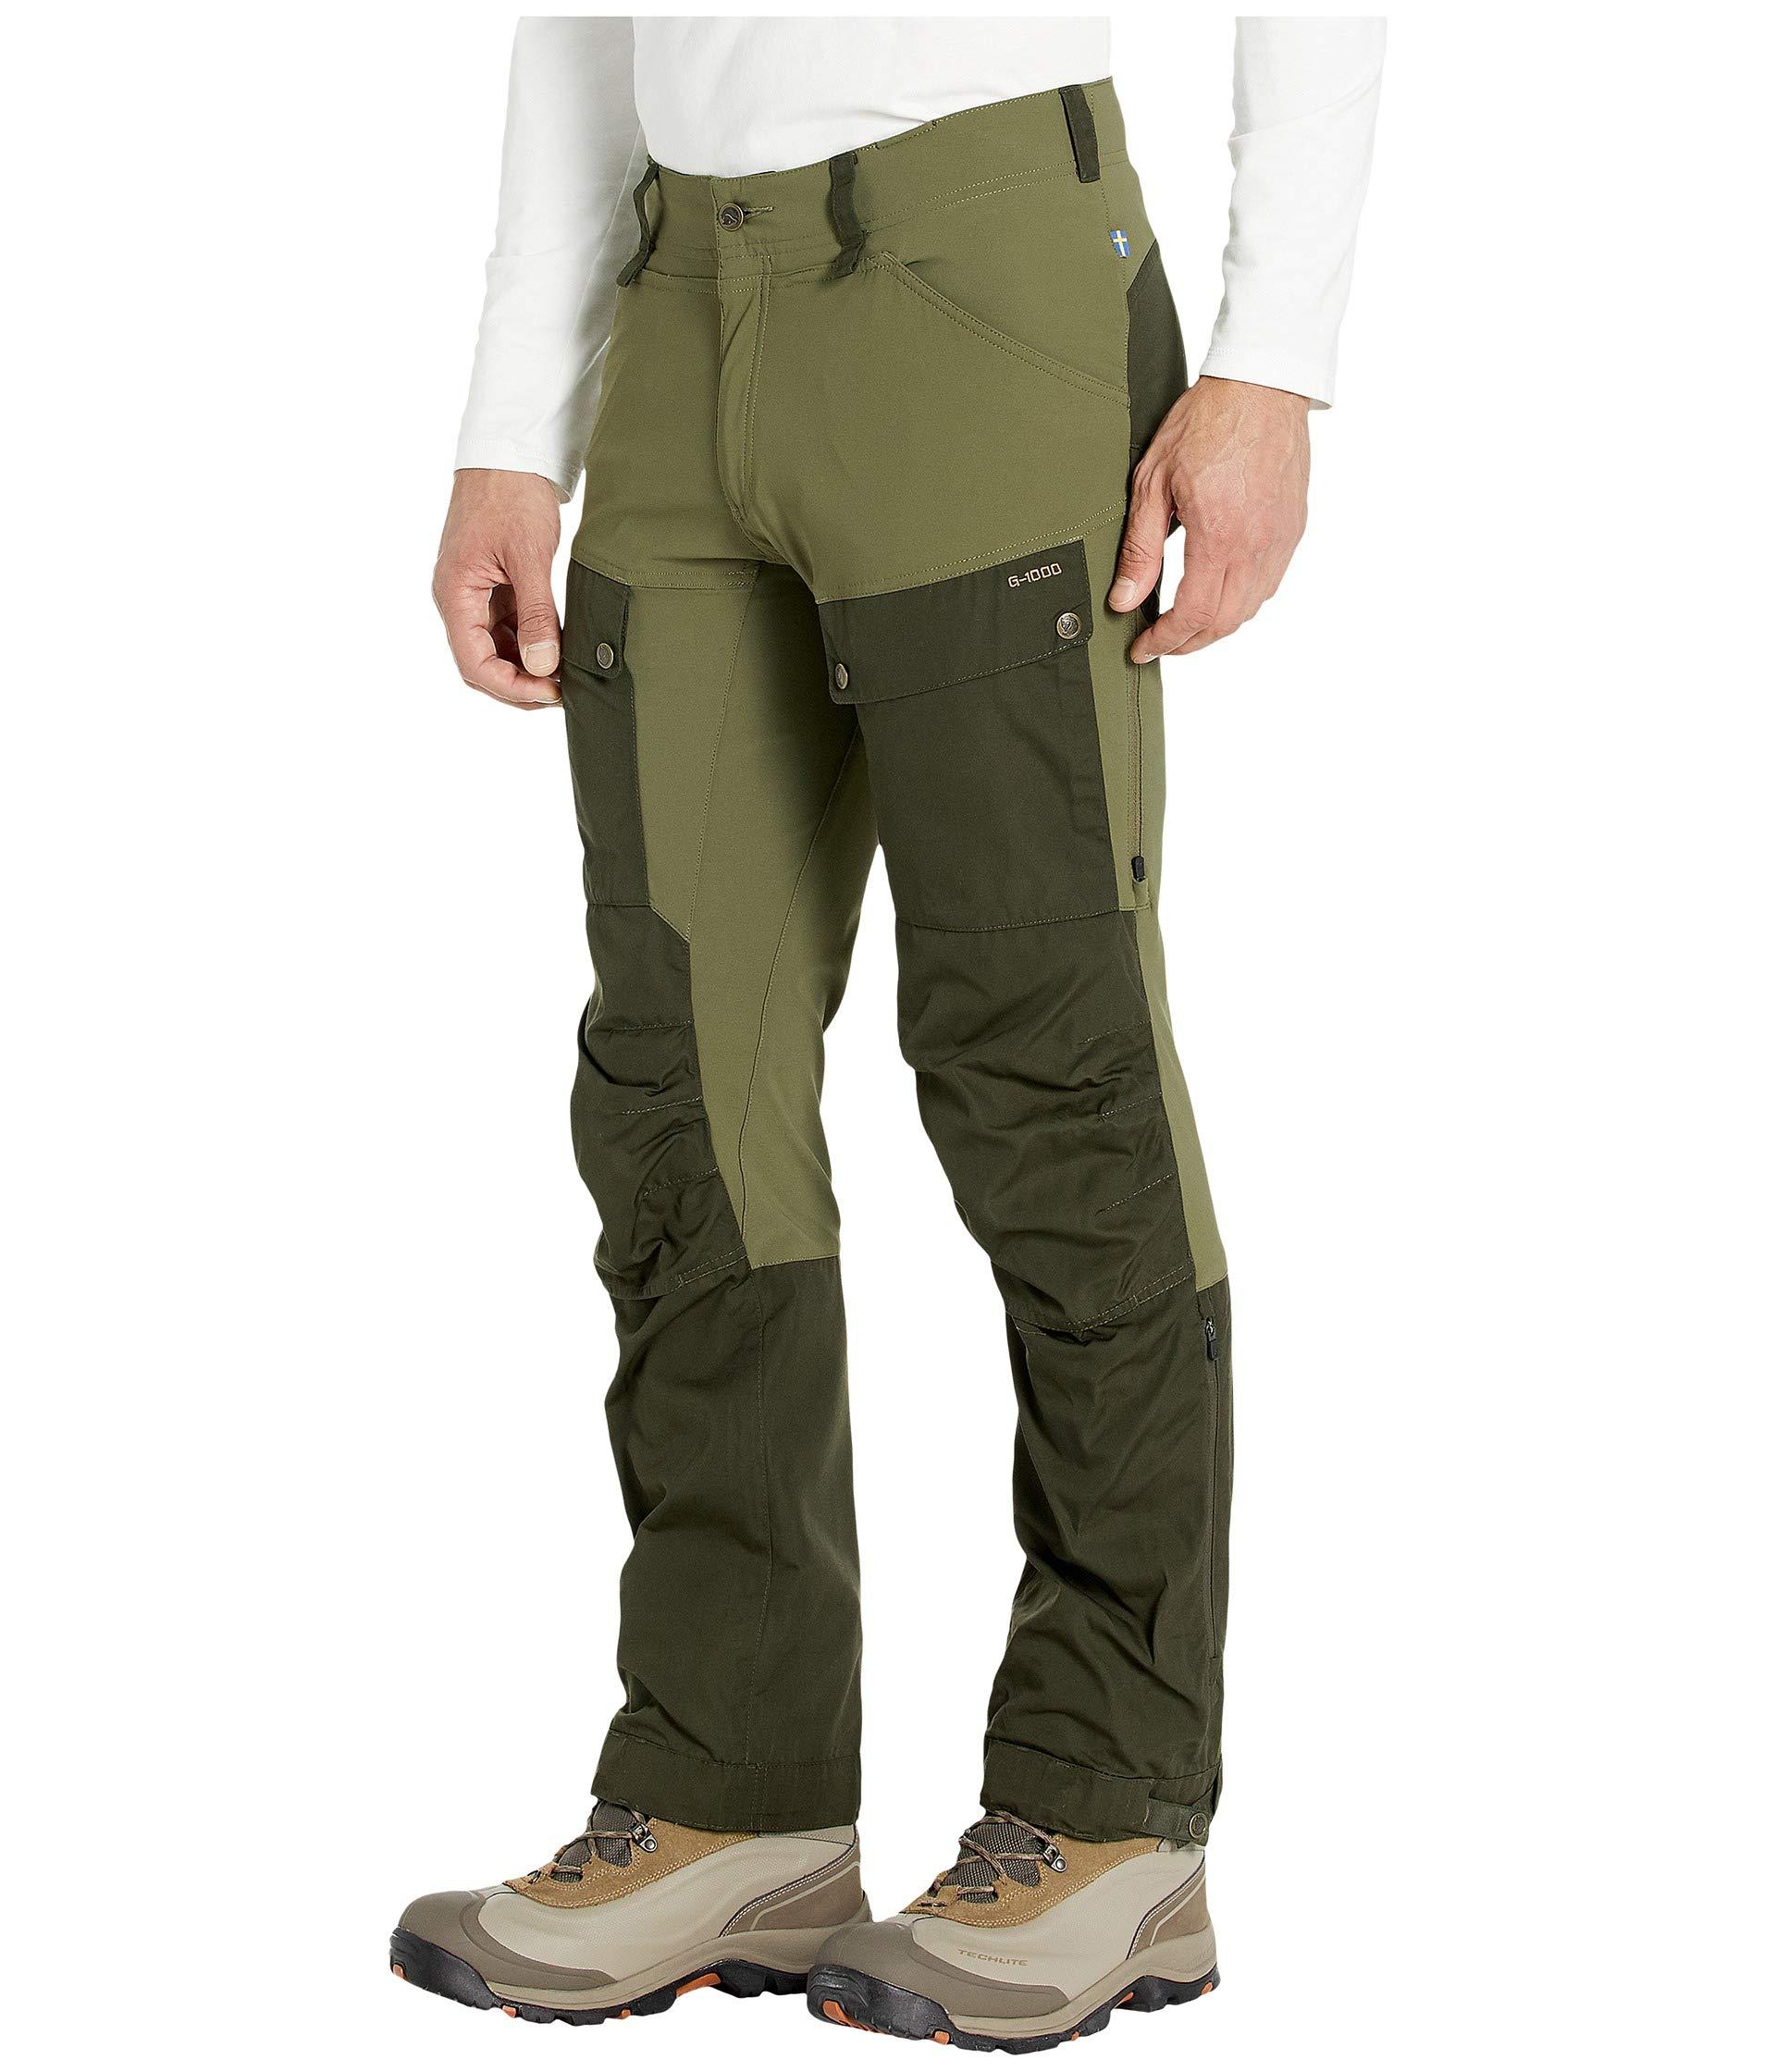 Fjallraven Synthetic Keb Gaiter Trousers in Olive (Green) for Men - Lyst